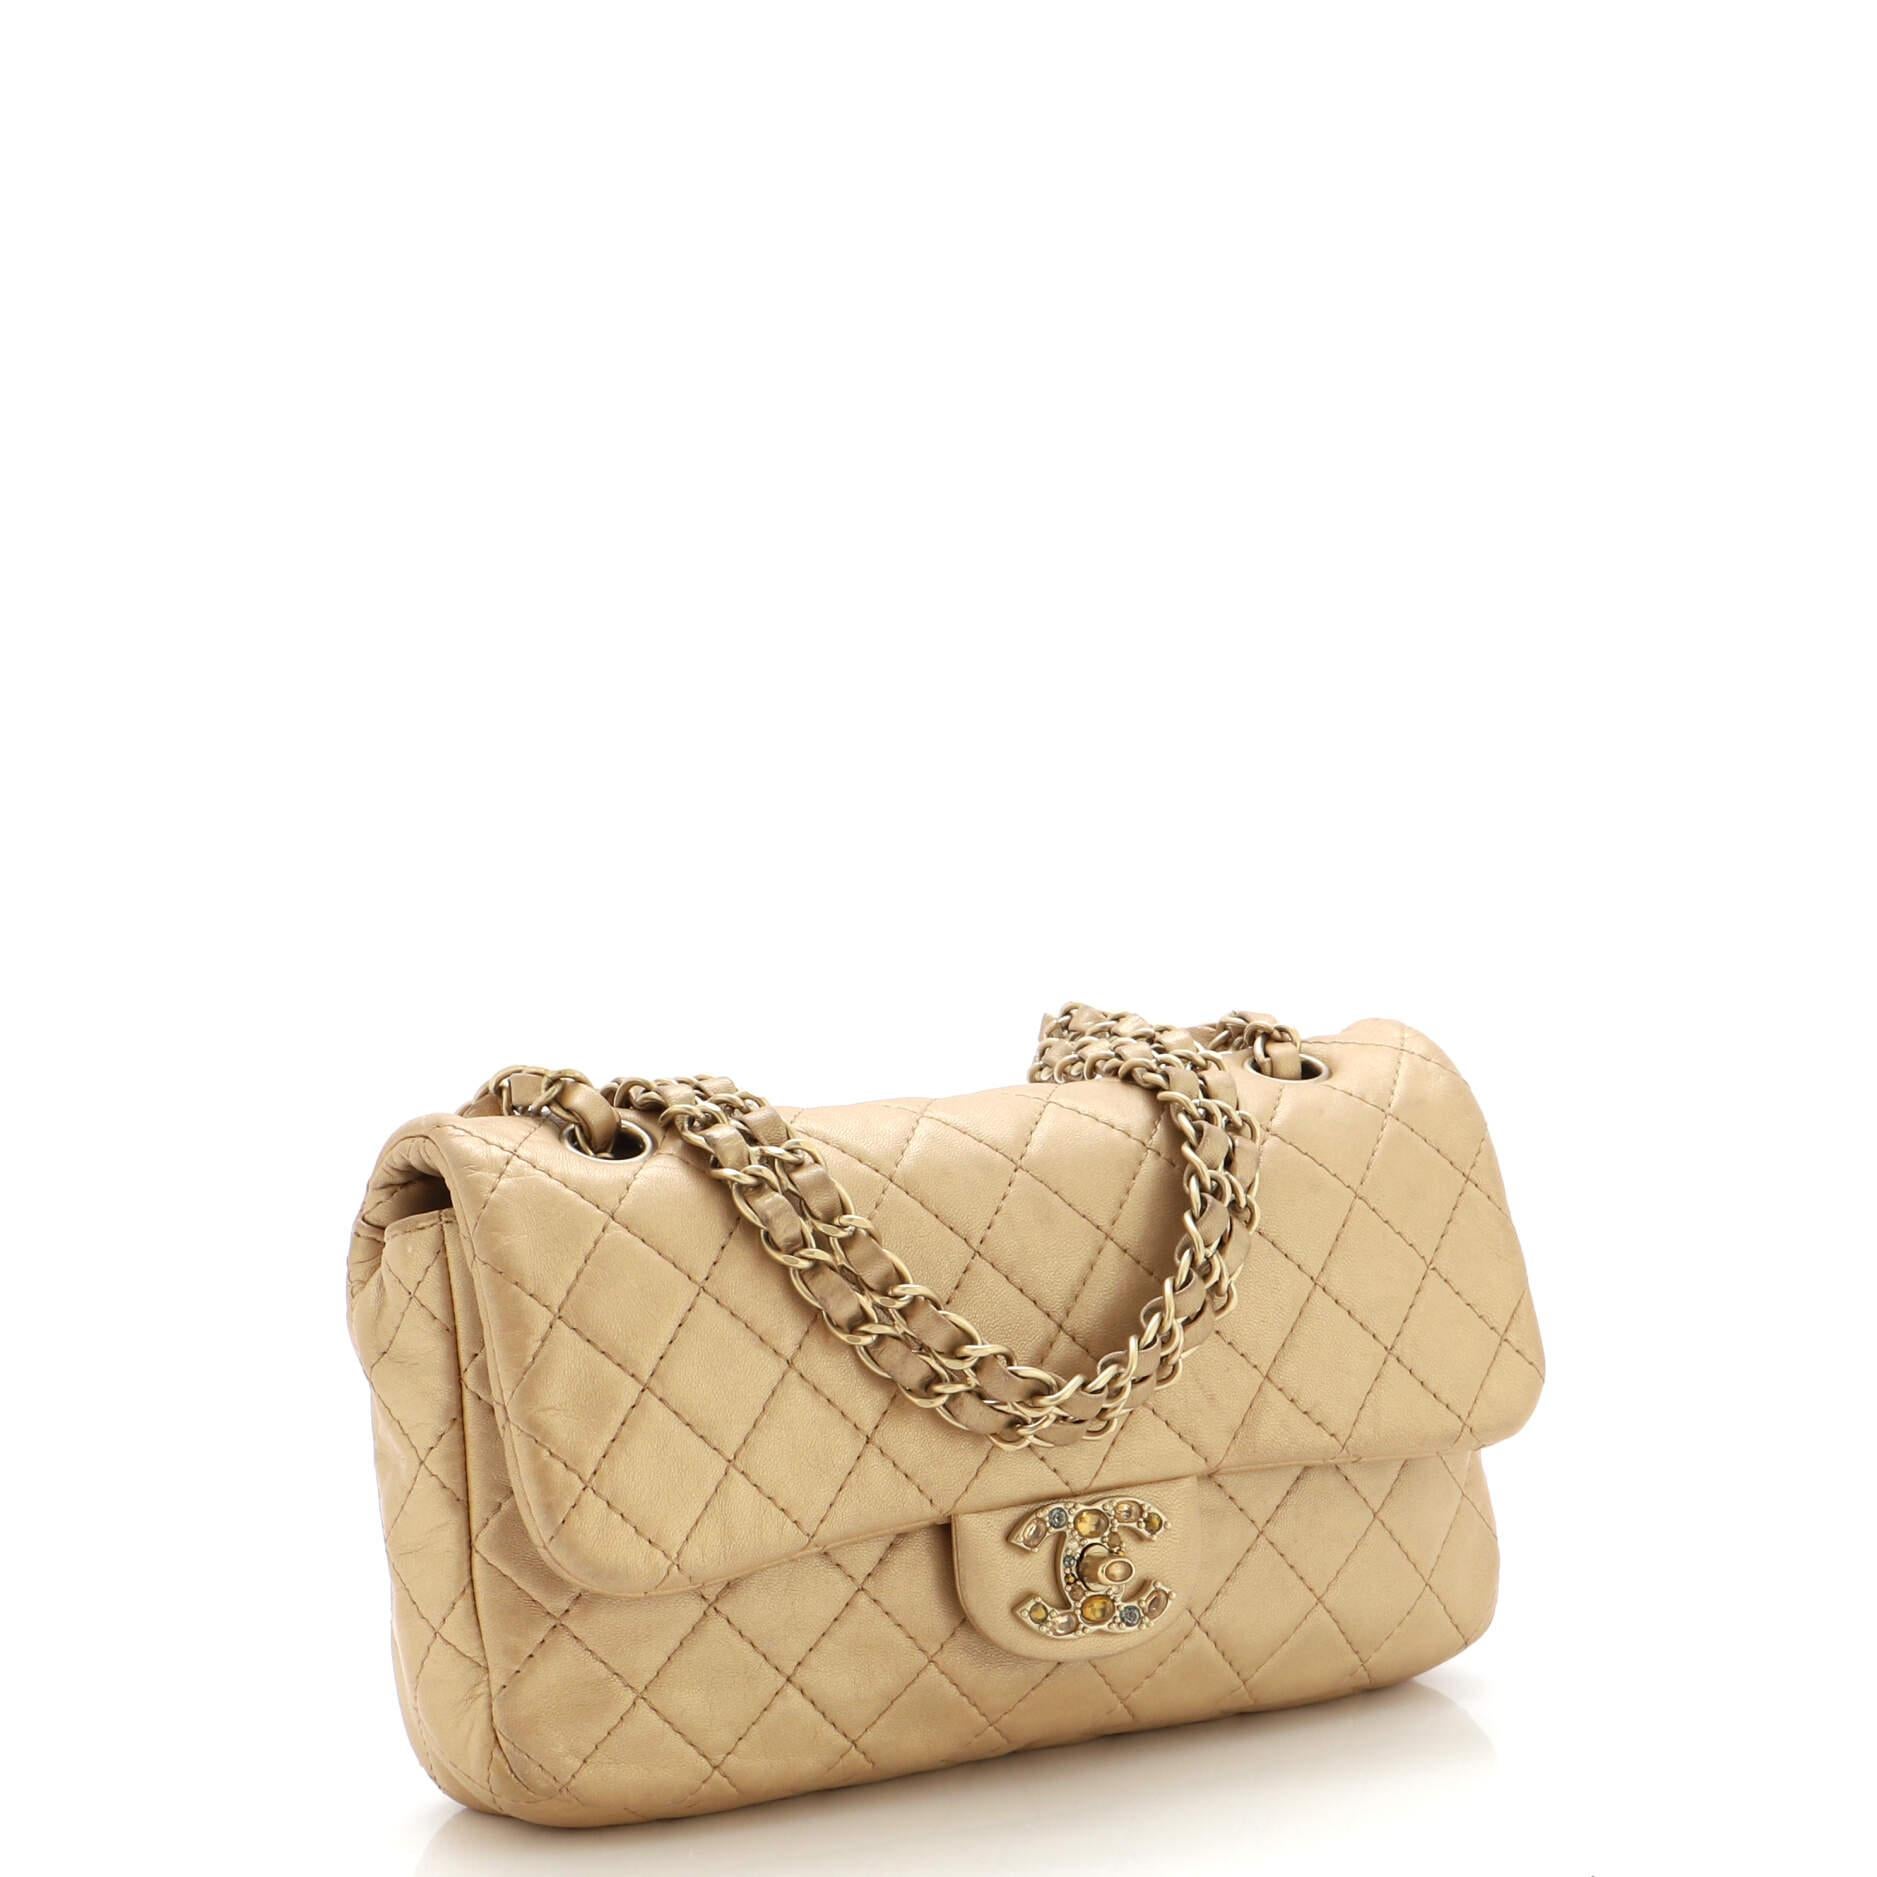 Chanel Precious Jewel Flap Bag Quilted Lambskin Medium In Good Condition For Sale In NY, NY